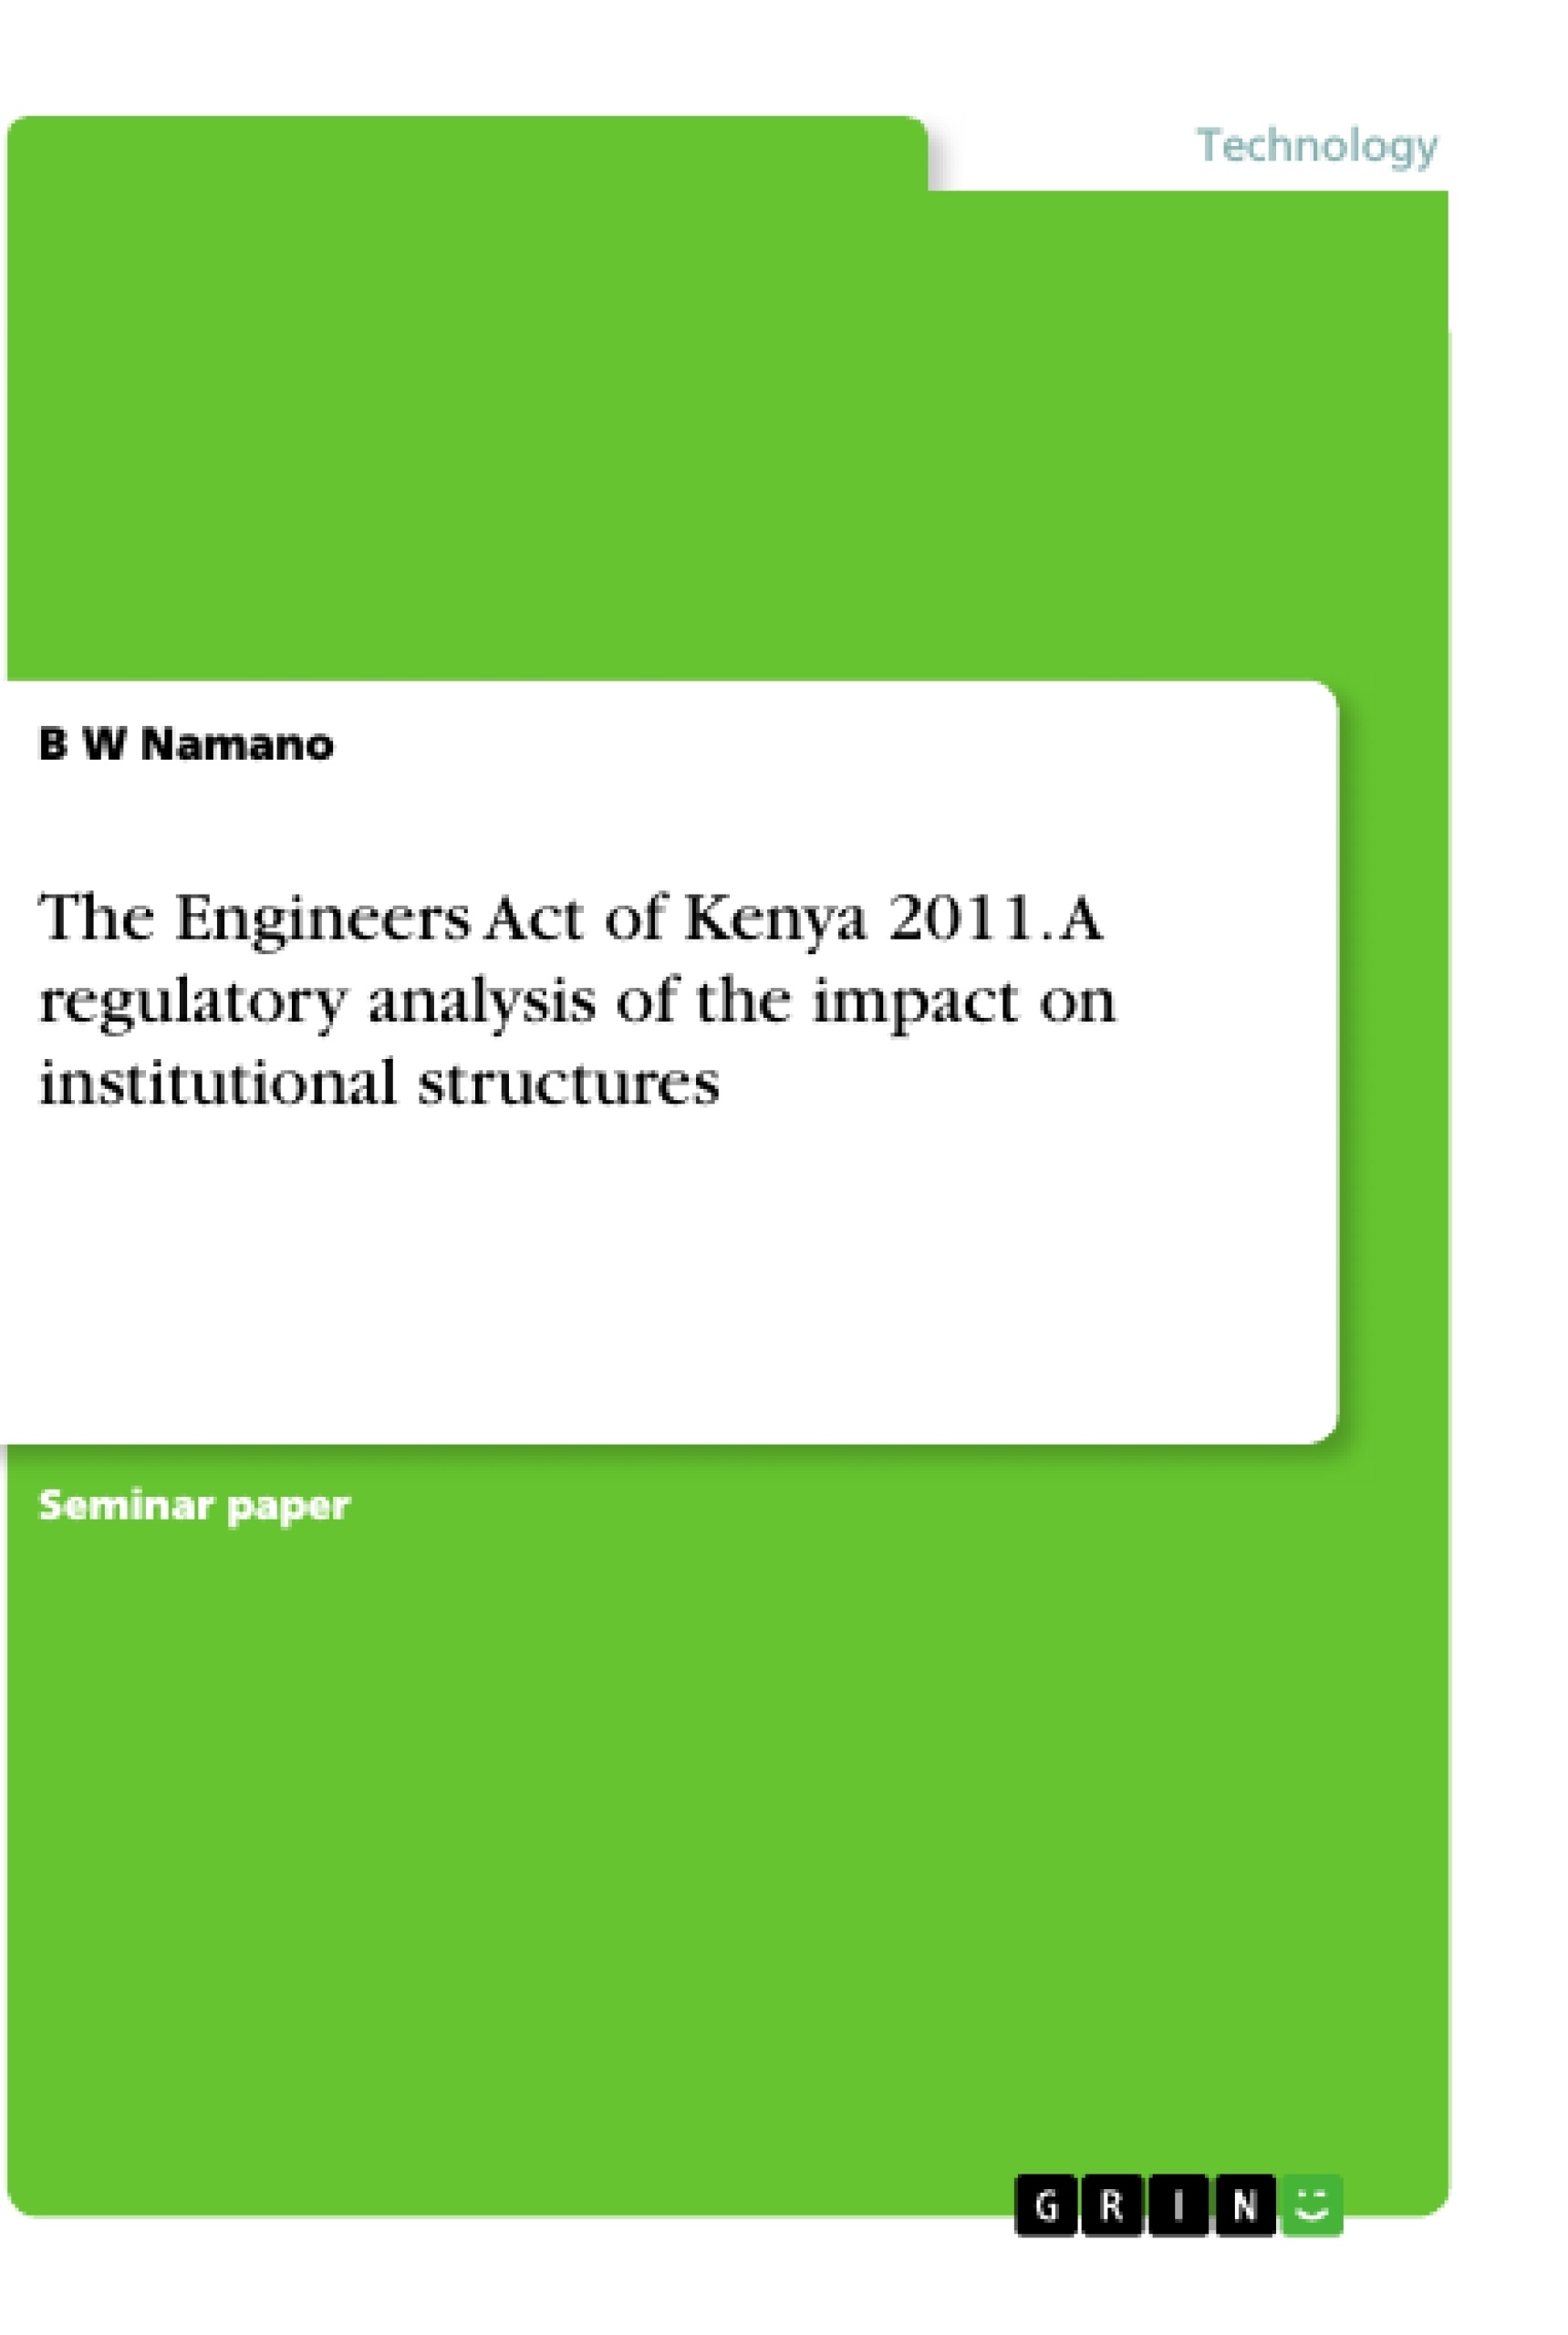 Title: The Engineers Act of Kenya 2011. A regulatory analysis of the impact on institutional structures